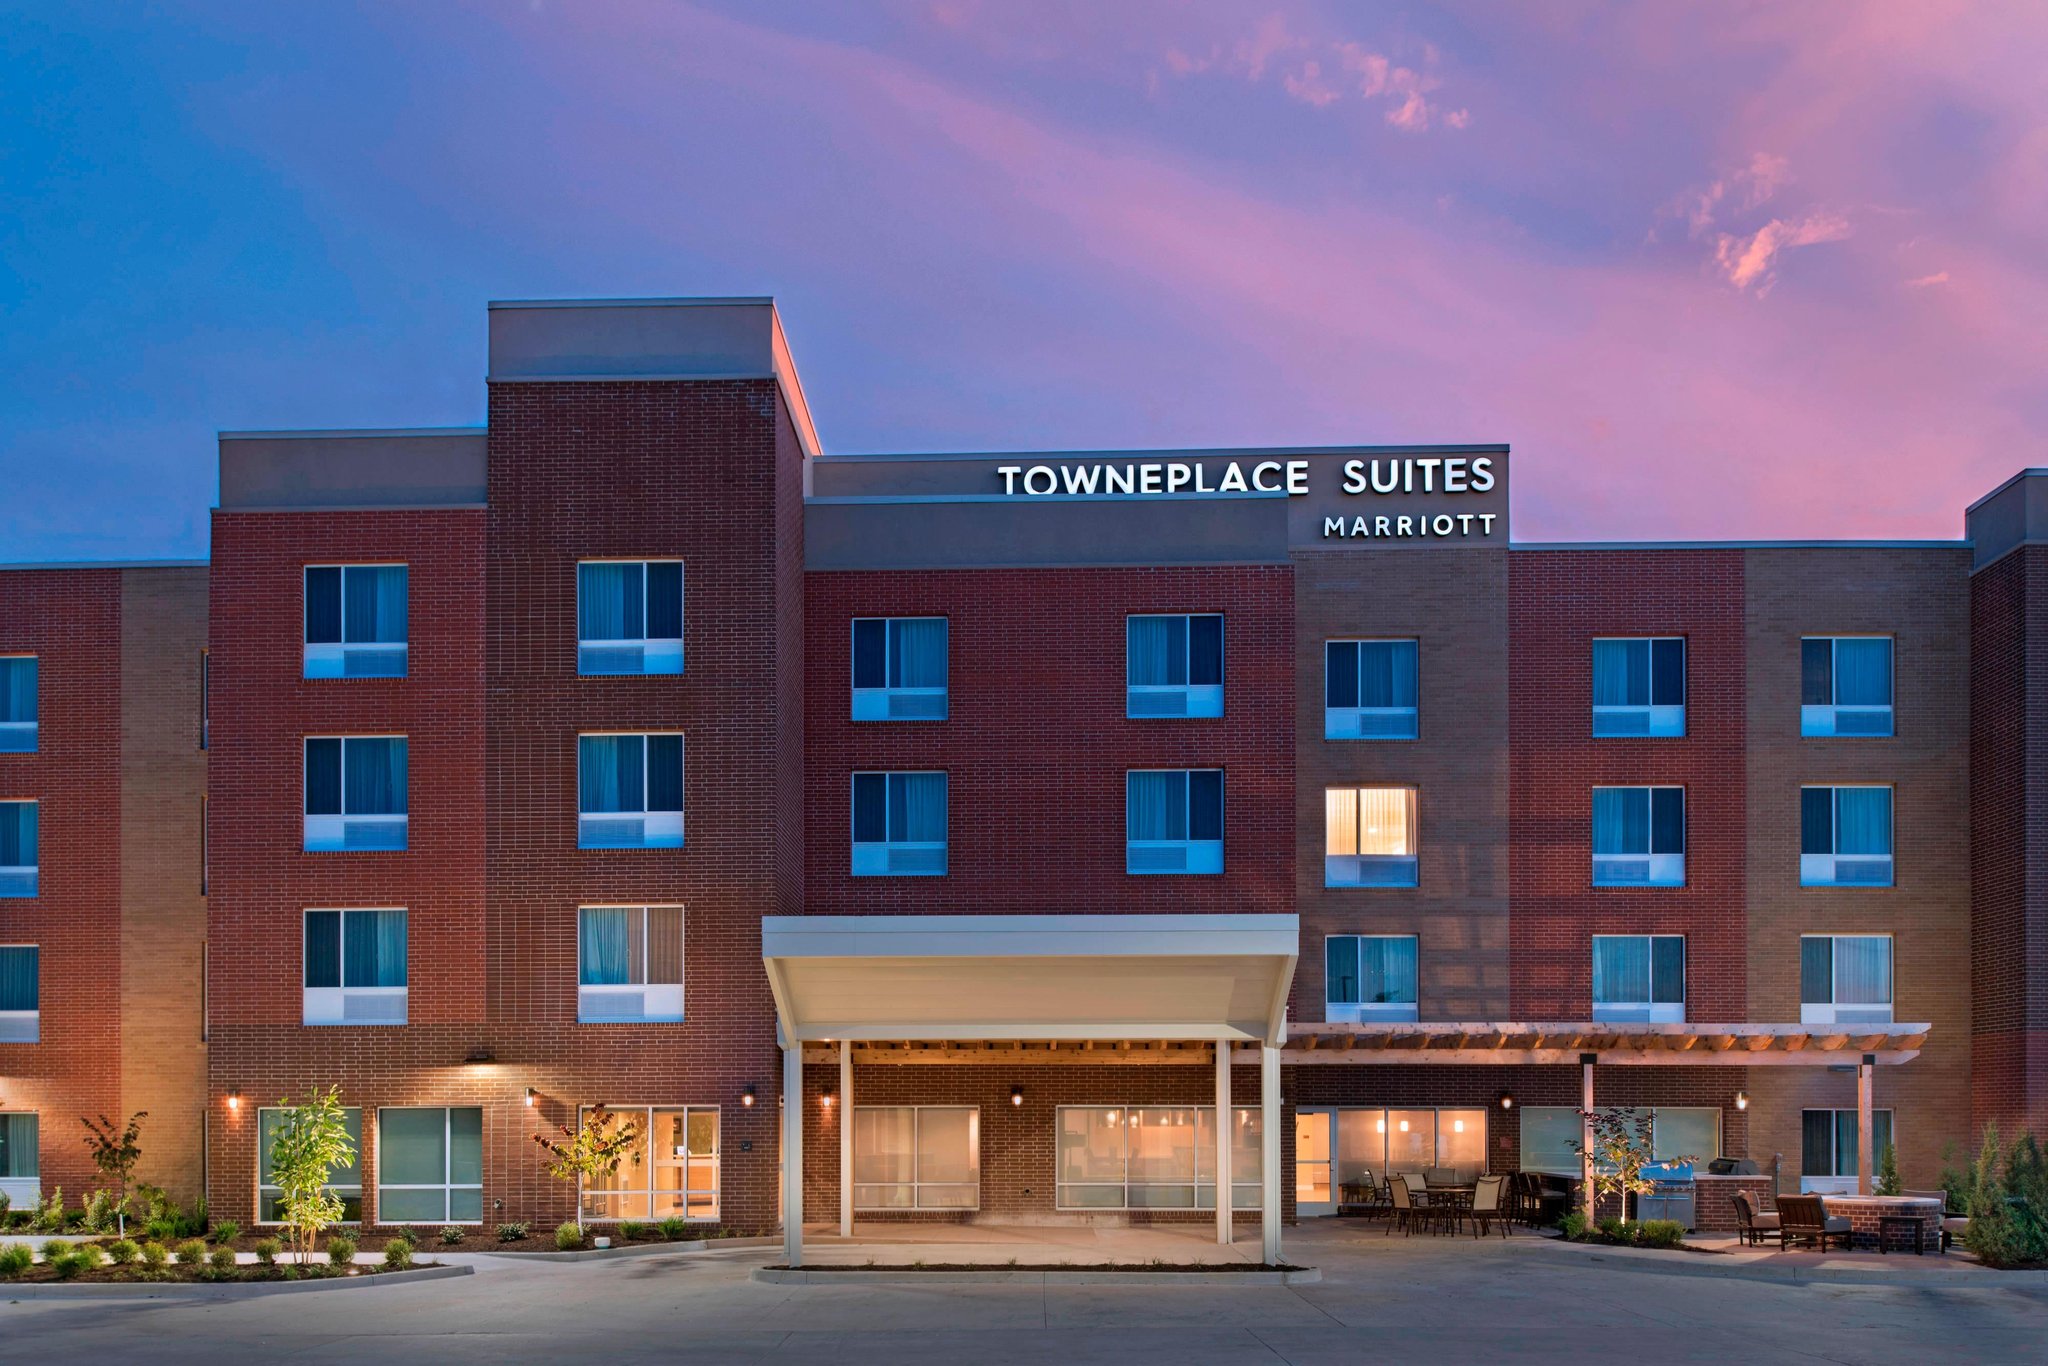 TownePlace Suites by Marriott Columbia